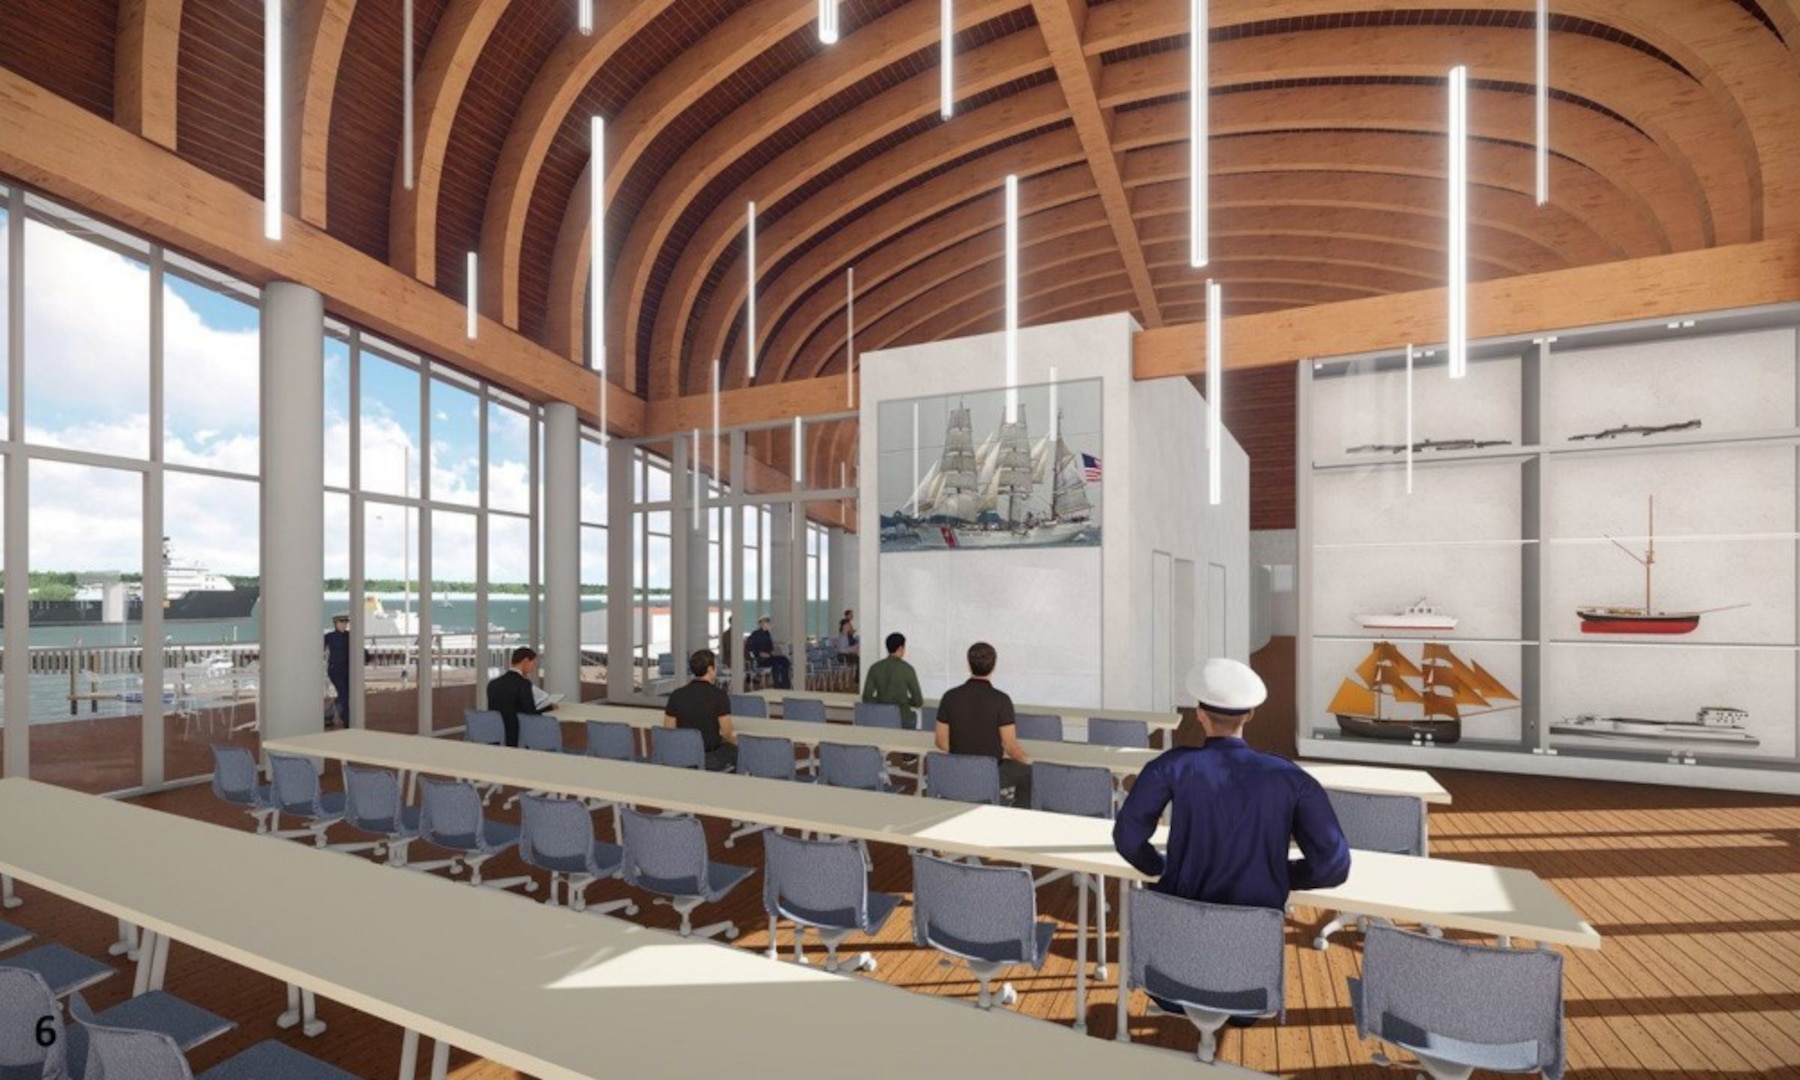 Architectural rendering of the future Maritime Center of Excellence (MCOE) at the U.S. Coast Guard Academy. The future MCOE will enhance the waterfront facilities at the Academy by offering interactive and high-tech classrooms for a variety of educational and leadership development courses. (U.S. Coast Guard photo courtesy of U.S. Coast Guard Academy Alumni Association)